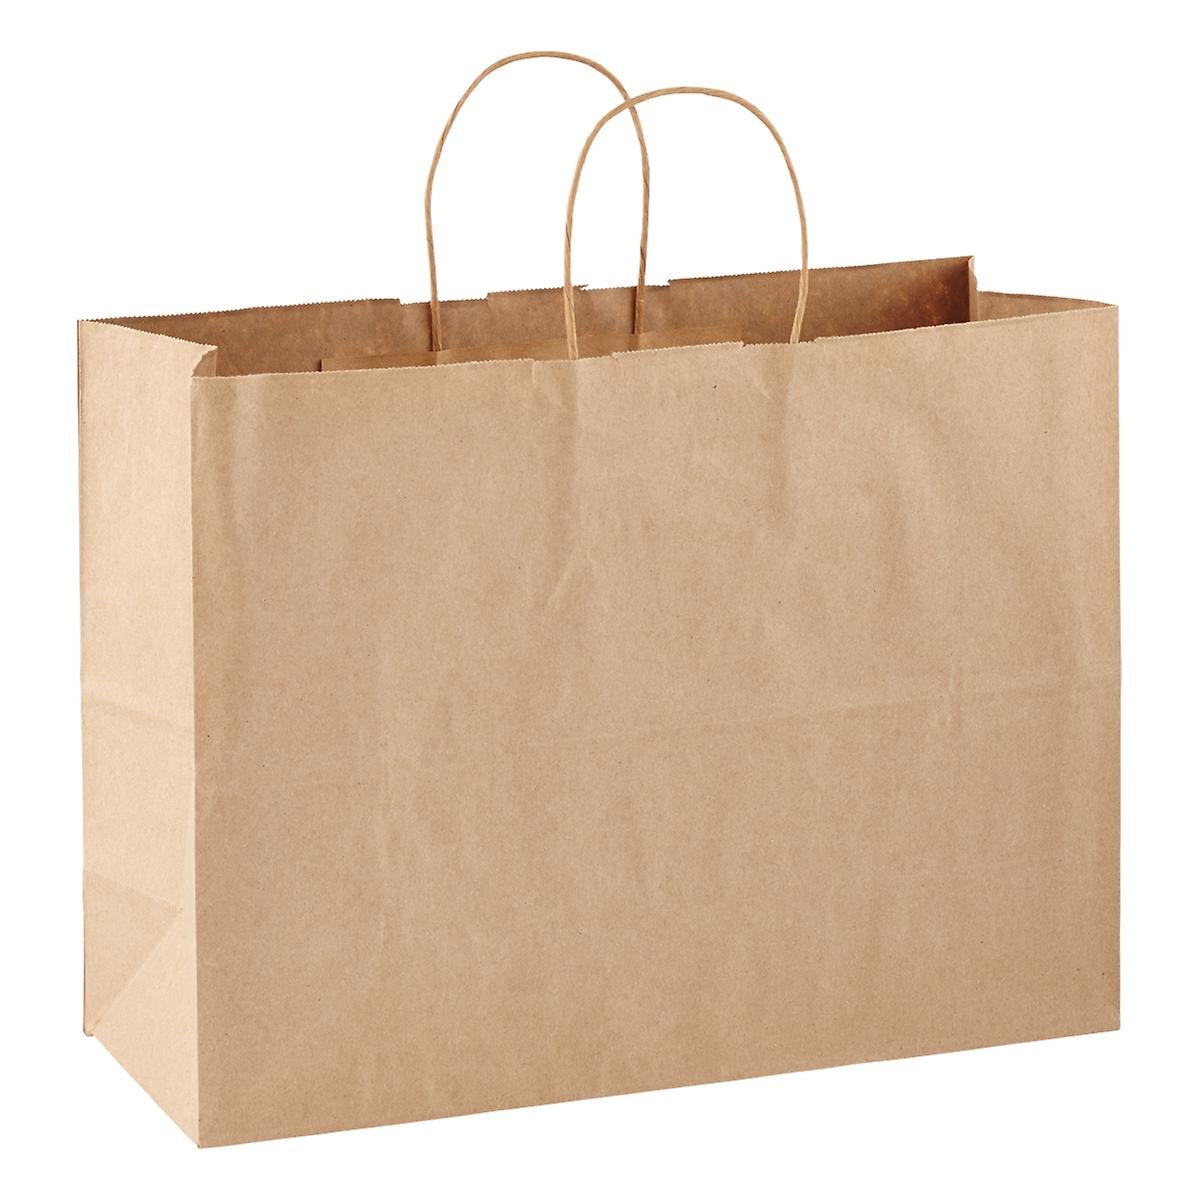 Large Paper Bags 14.5″ x 5″ x 12″ – Brown Paper Shopping Bag with